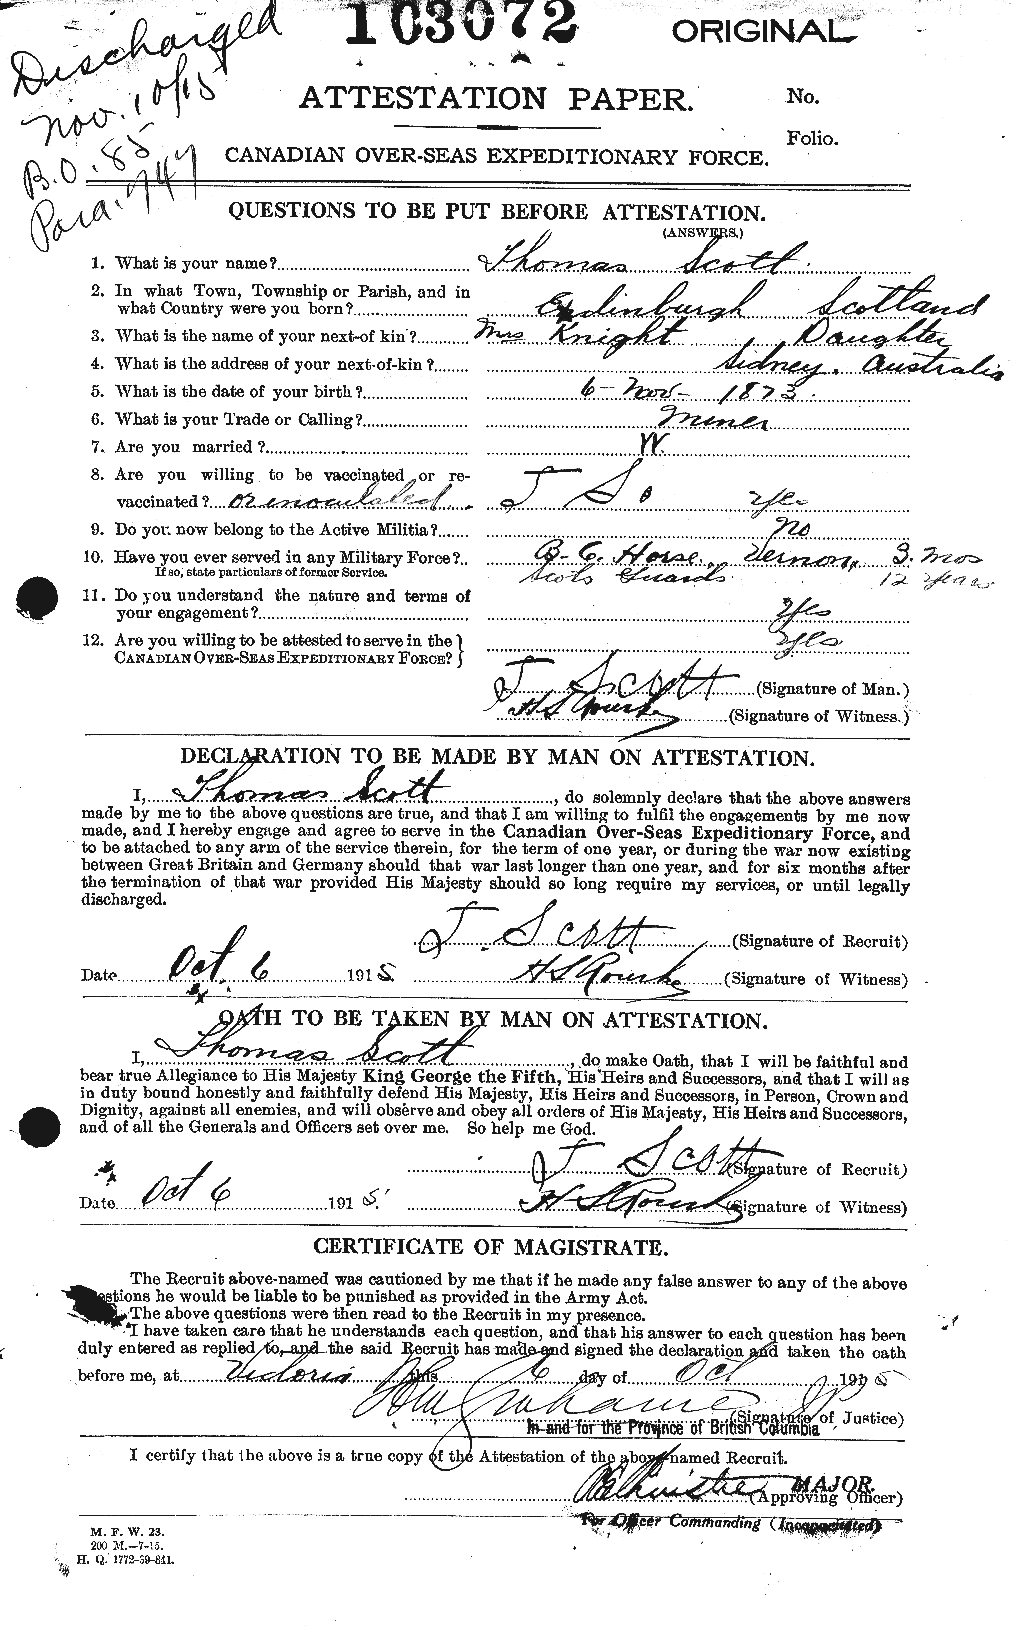 Personnel Records of the First World War - CEF 088538a